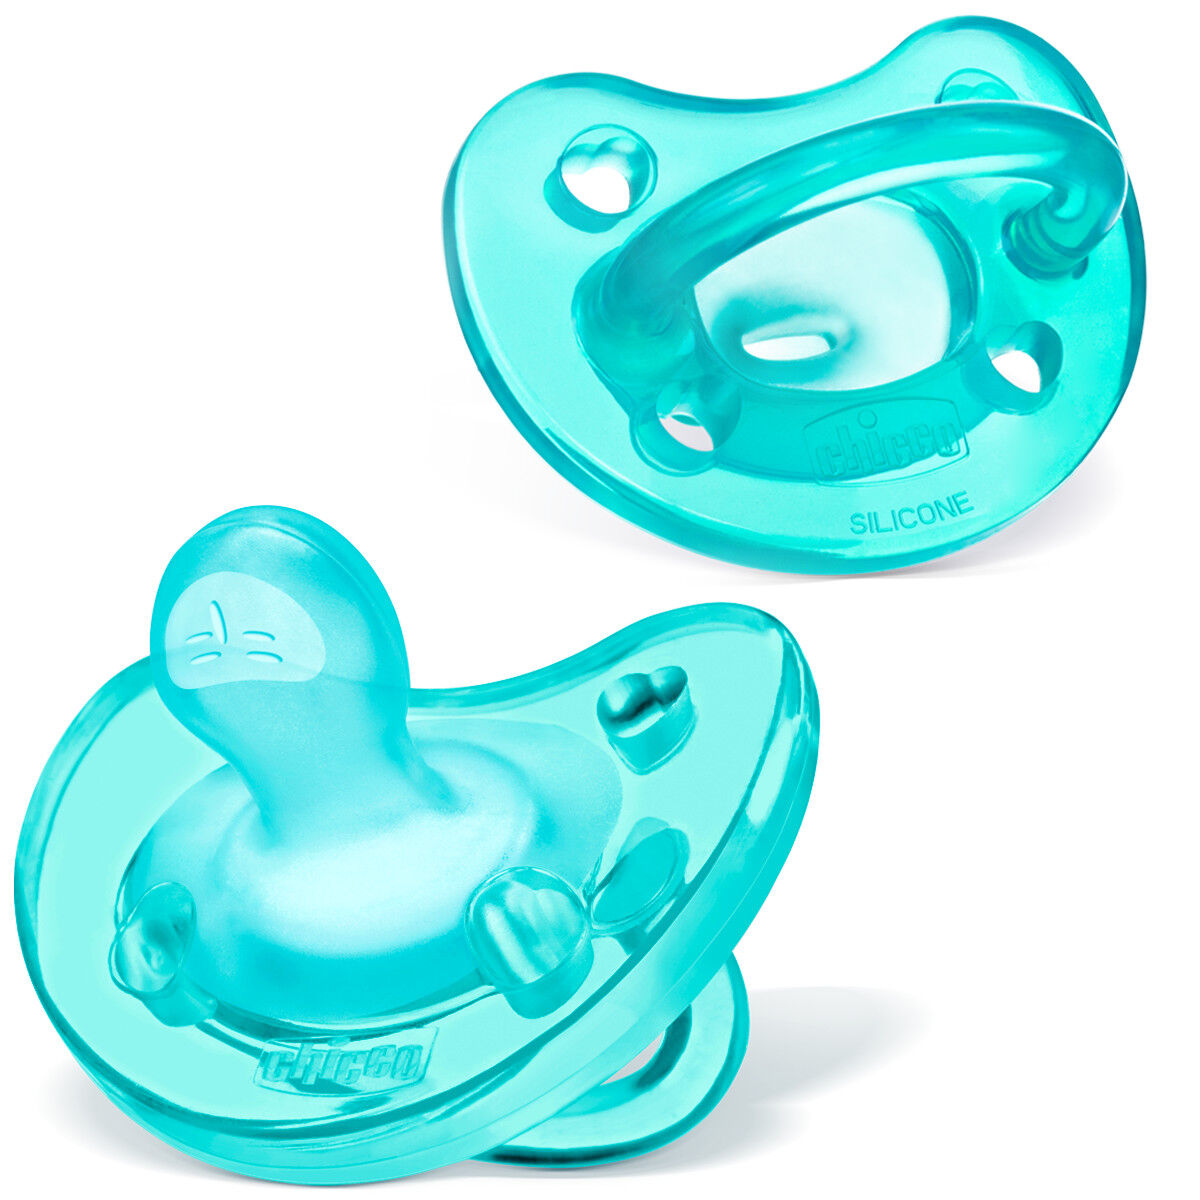 BABY PACIFIERHAMSA SHAPE PACIFIER3m+SOFT SILICONE PACIFIERBPA FREE 